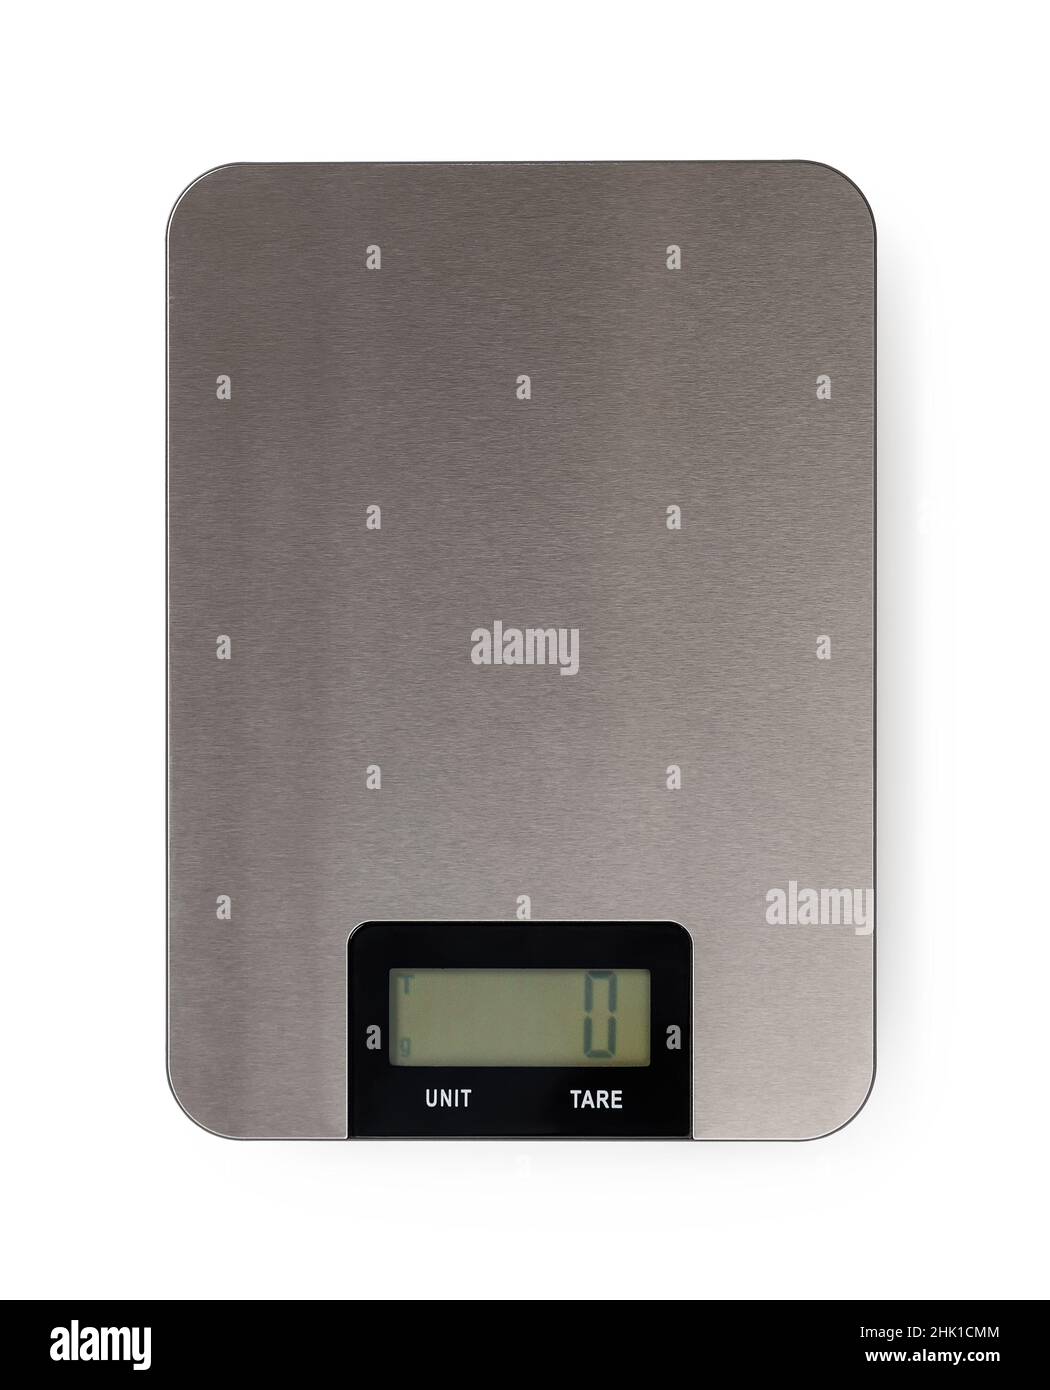 https://c8.alamy.com/comp/2HK1CMM/digital-kitchen-scale-isolated-on-a-white-background-electronic-scales-for-measurement-the-food-weight-during-dieting-and-cooking-measuring-device-2HK1CMM.jpg